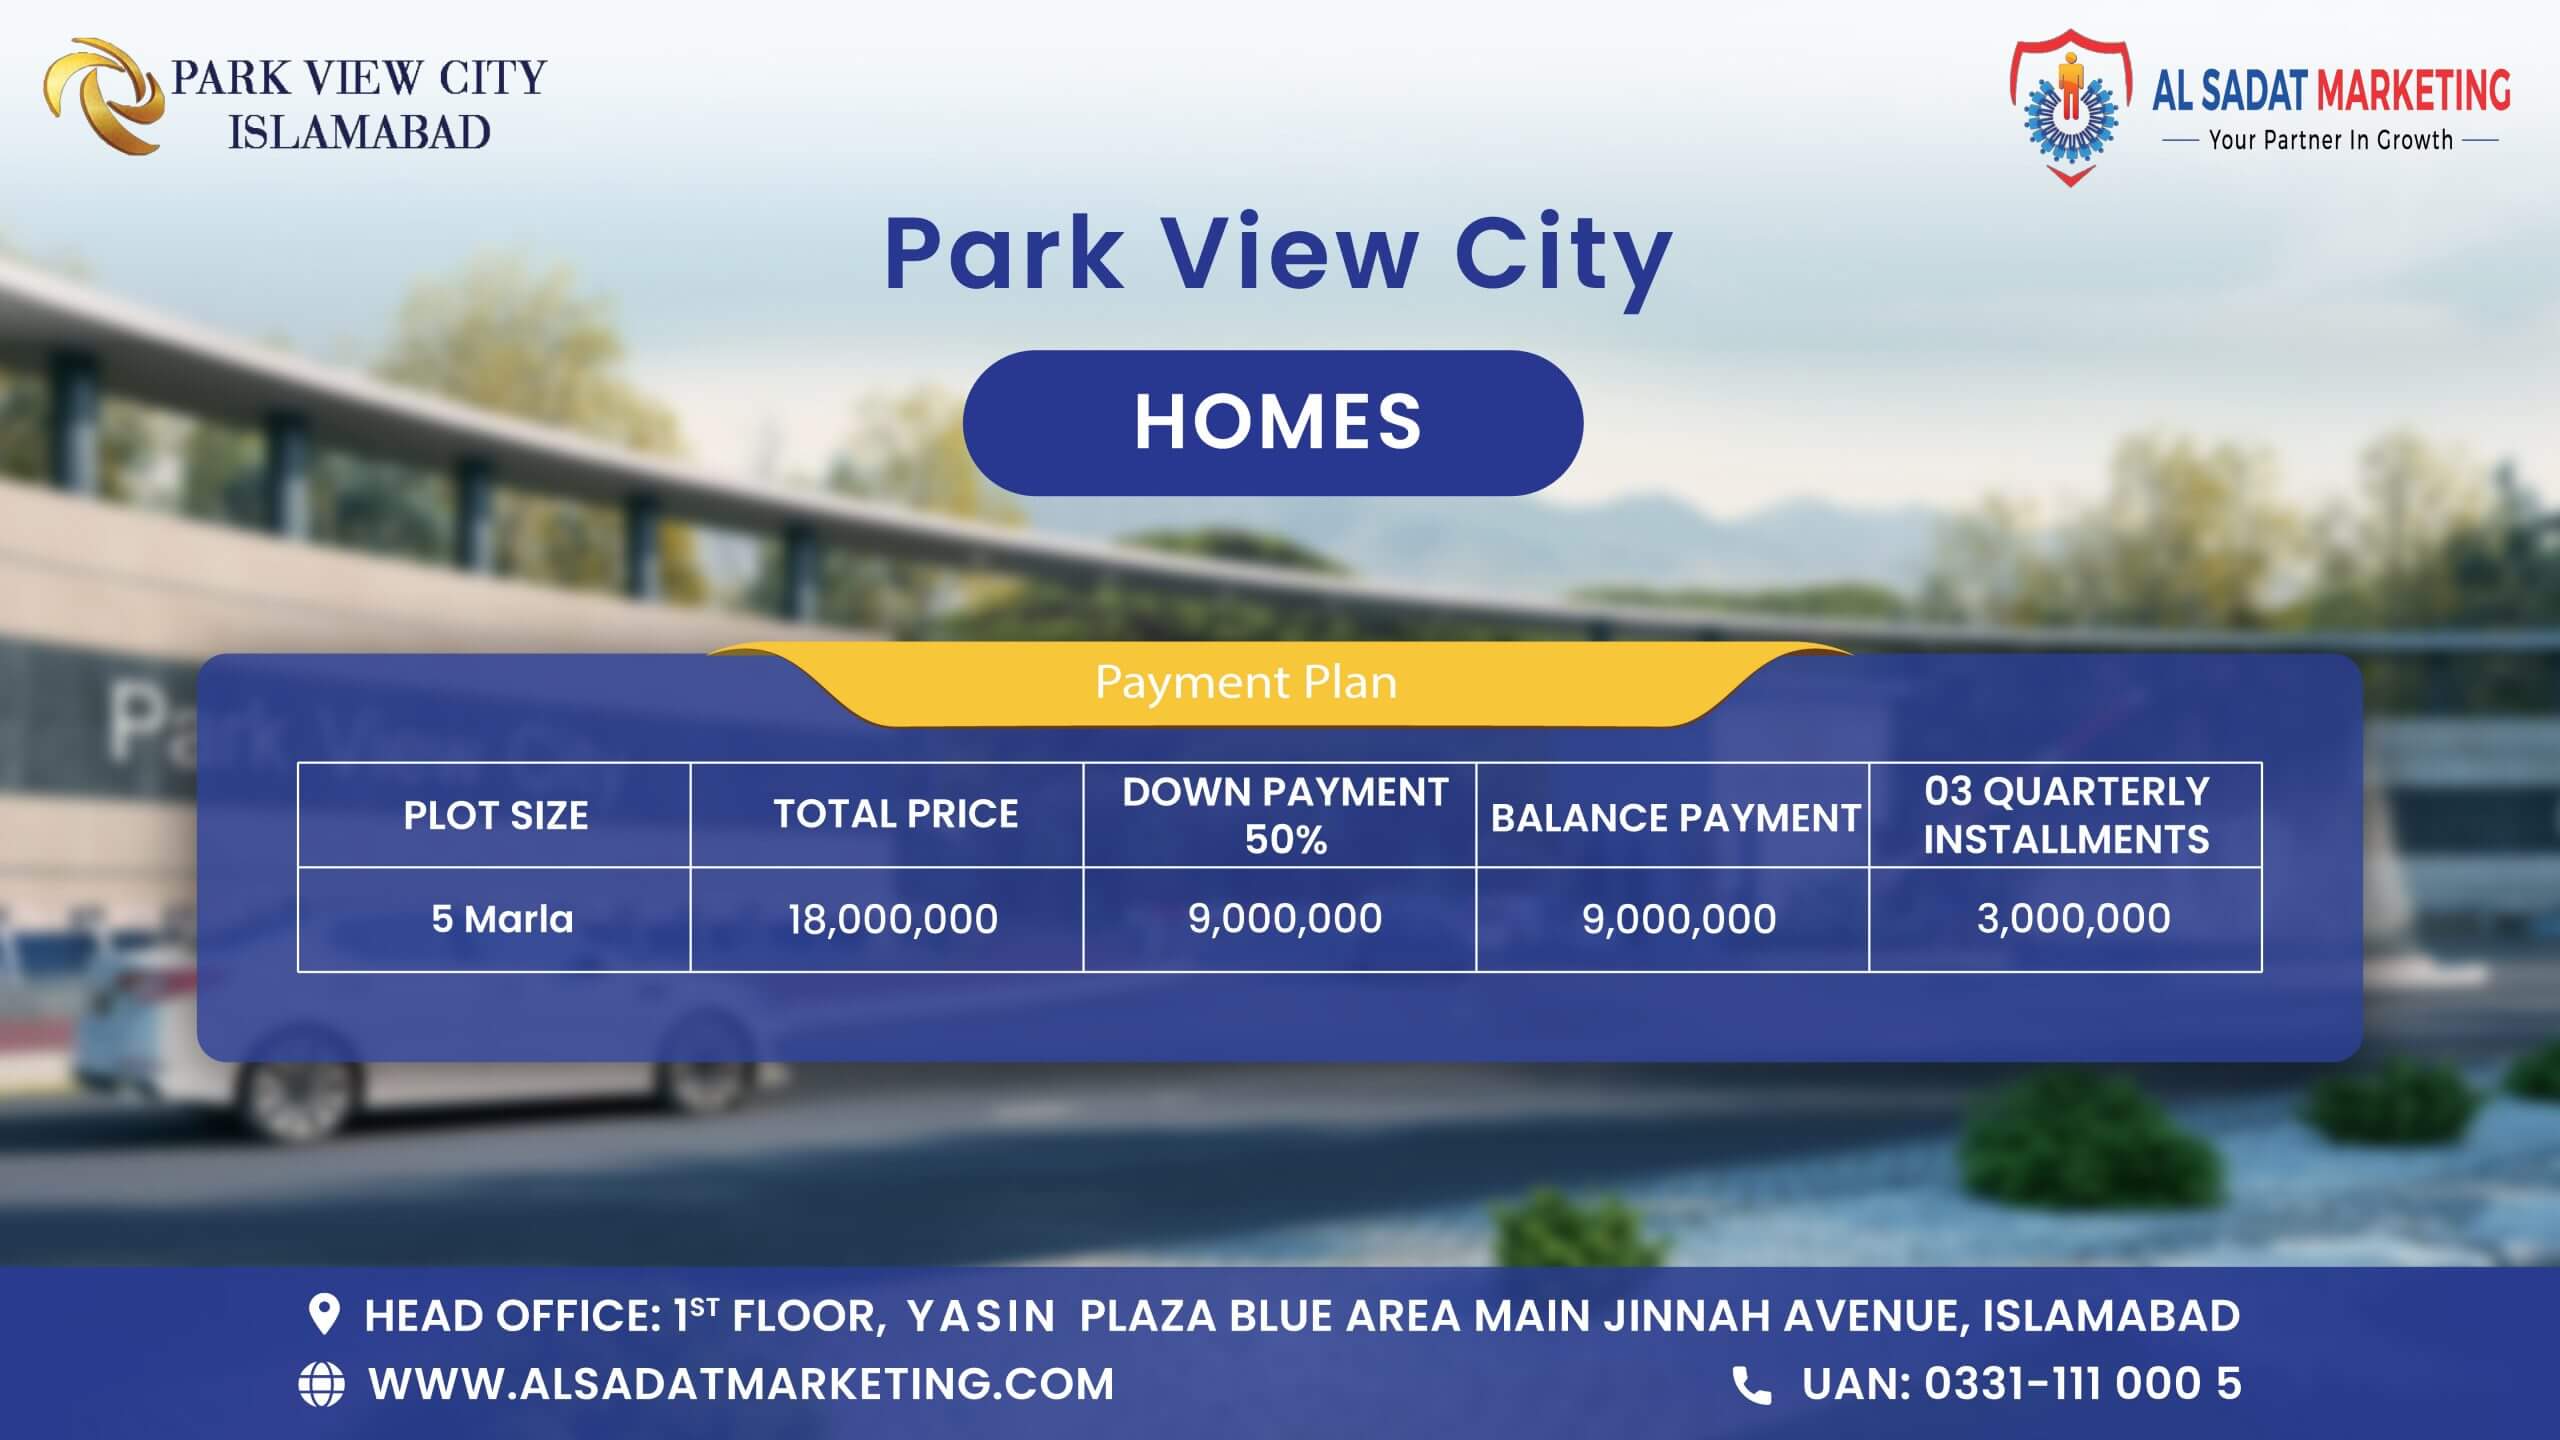 park view city islamabad homes payment plan - park view city homes payment plan - park view city islamabad payment plan - park view city payment plan - payment plan of park view city islamabad – payment plan of park view city – park view city islamabad – park view city – park view city housing society - park view city islamabad housing society – park view city real estate project - park view city islamabad real estate project - al sadat marketing - alsadat marketing - al-sadat marketing